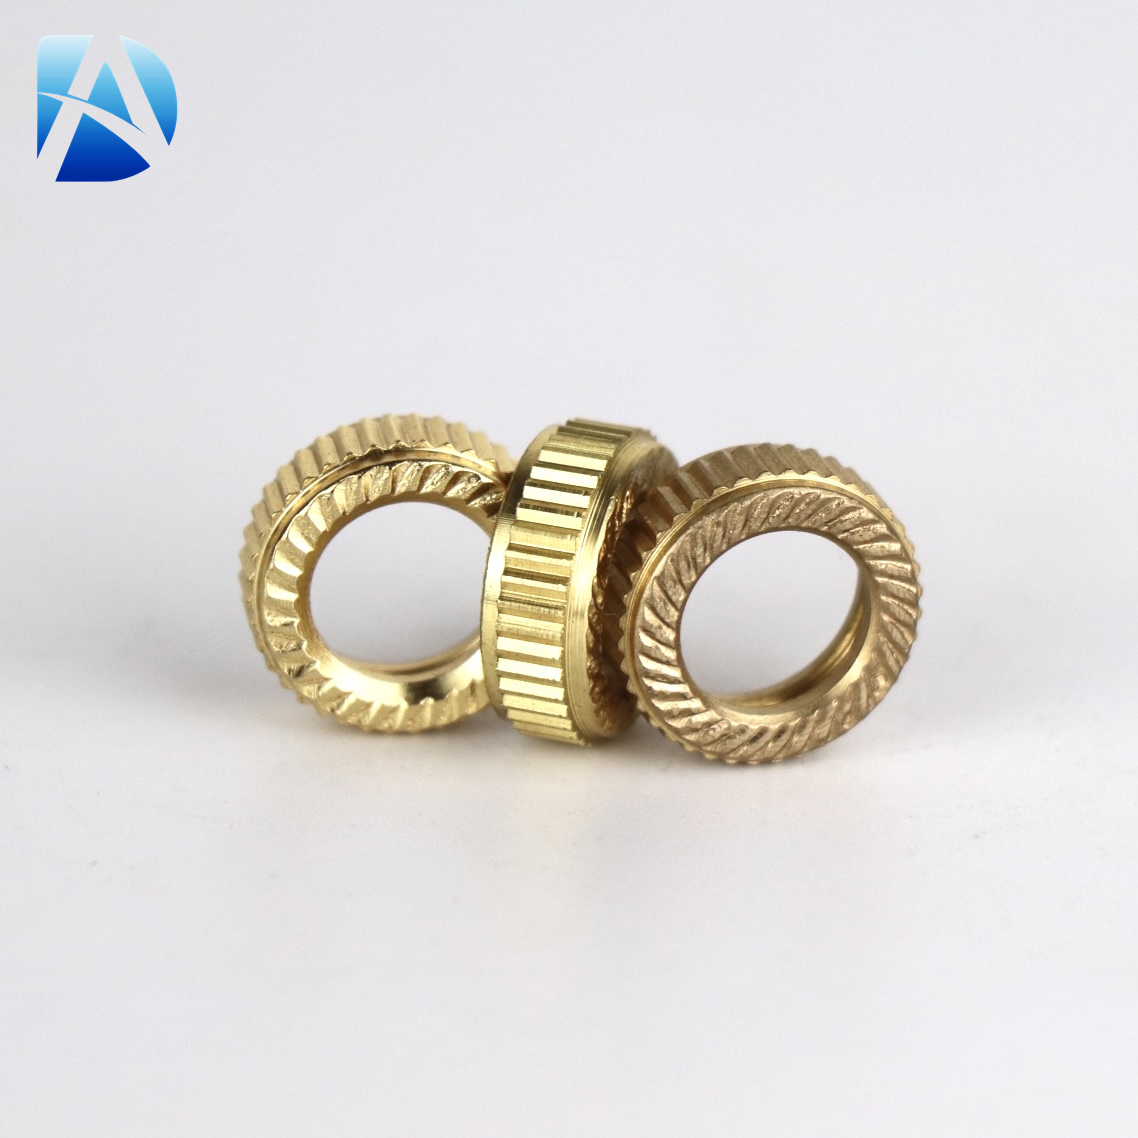 CNC Turning Service for Machined Brass Round Nuts with Knurled Metal Brass Threaded Inserts